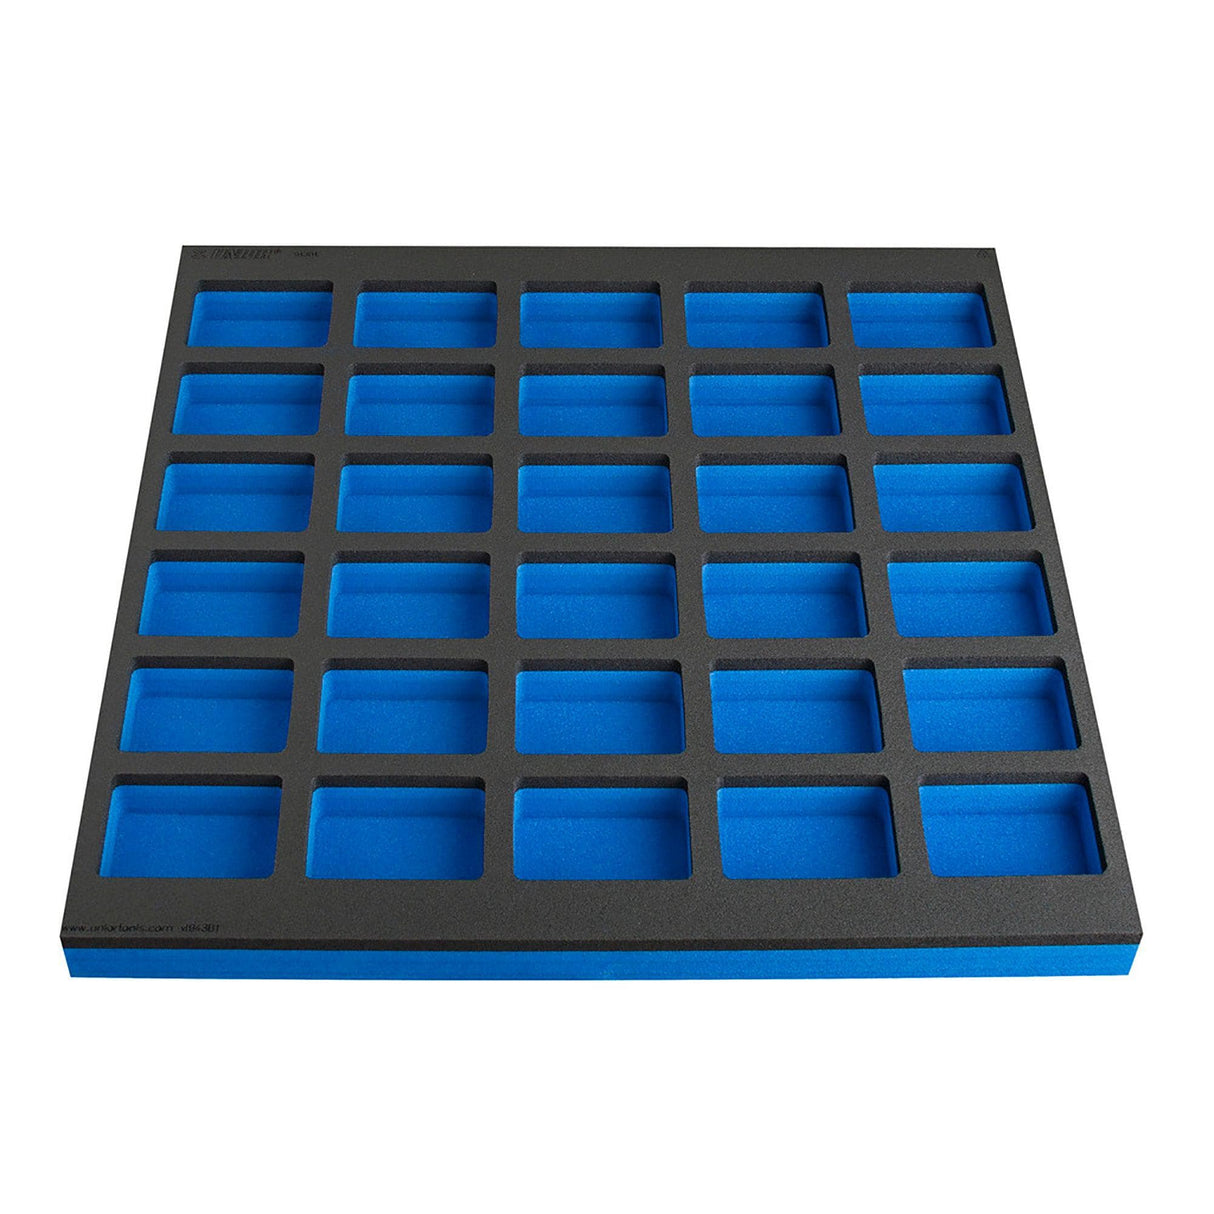 Unior Sos Tool Tray With Compartment For Work Bench Big Tool Chest (30 Compartments):  570 X 562Mm